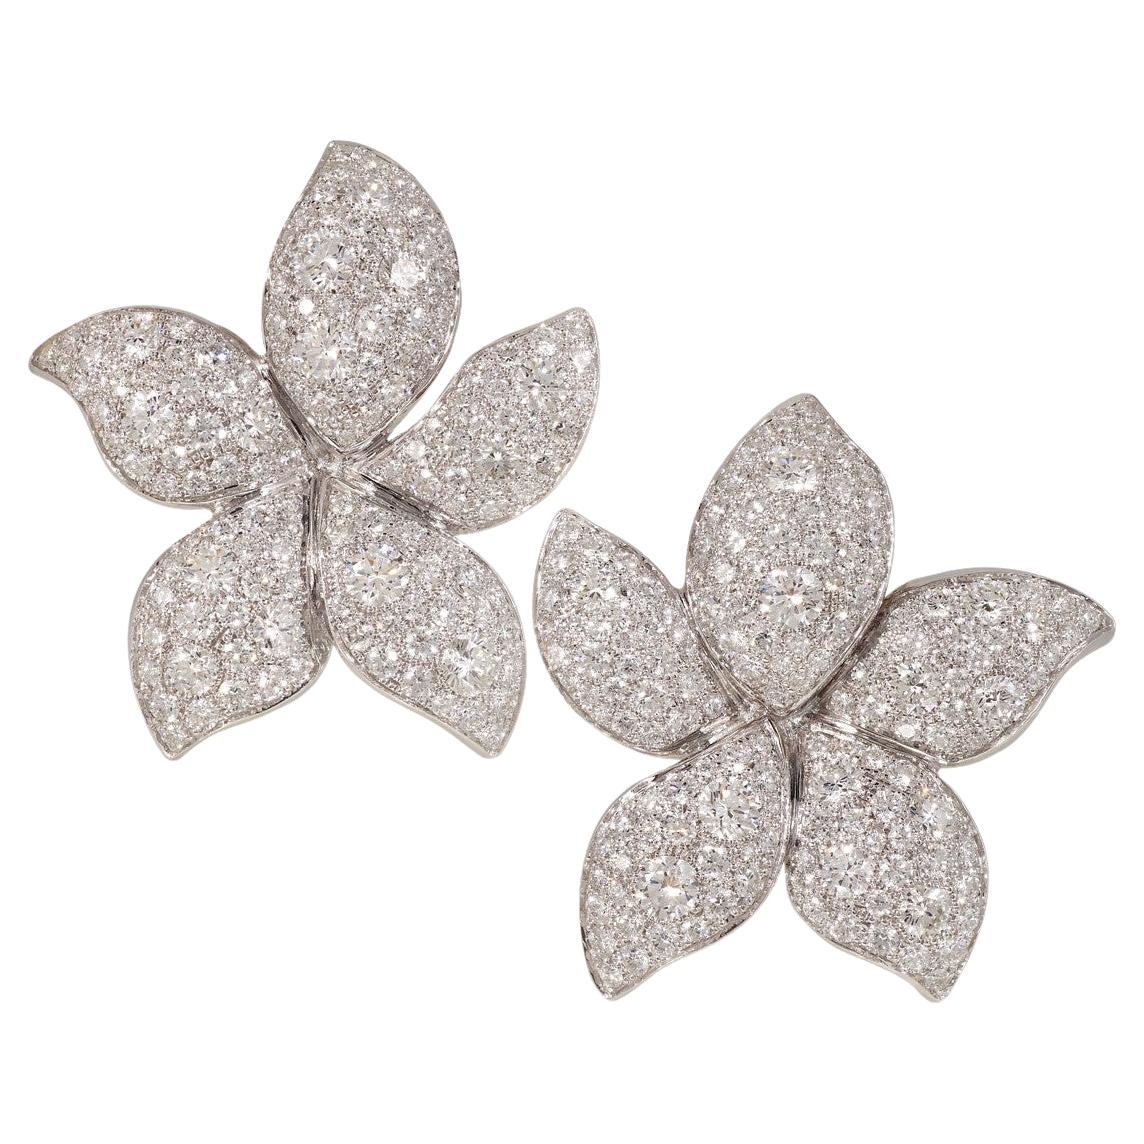 Contemporary "Flower" Earrings Set in White Gold with Diamonds